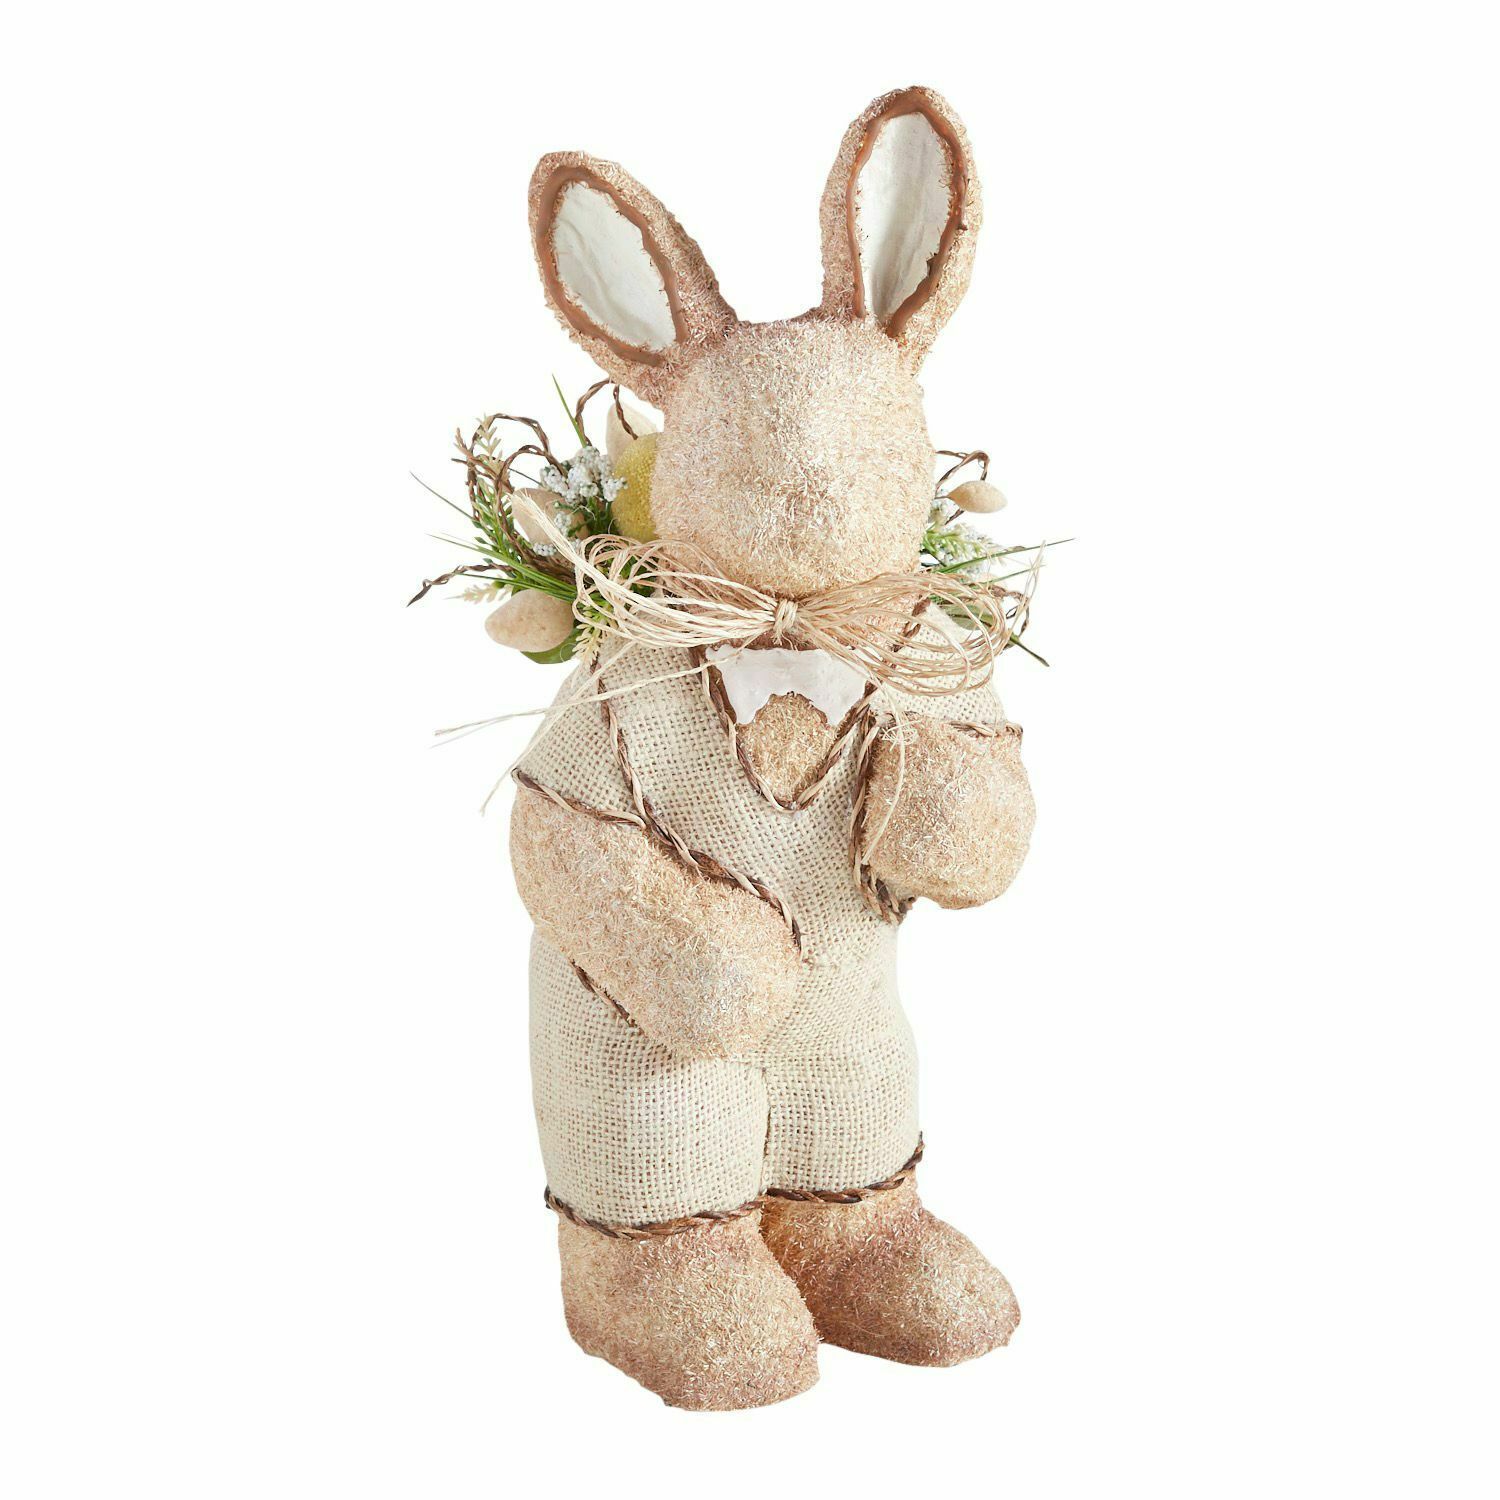 NWT PIER 1 IMPORTS  NATURAL  ORGANIC FARM EASTER BUNNY RABBIT LARGE 16.5"Hx6"W - $58.41